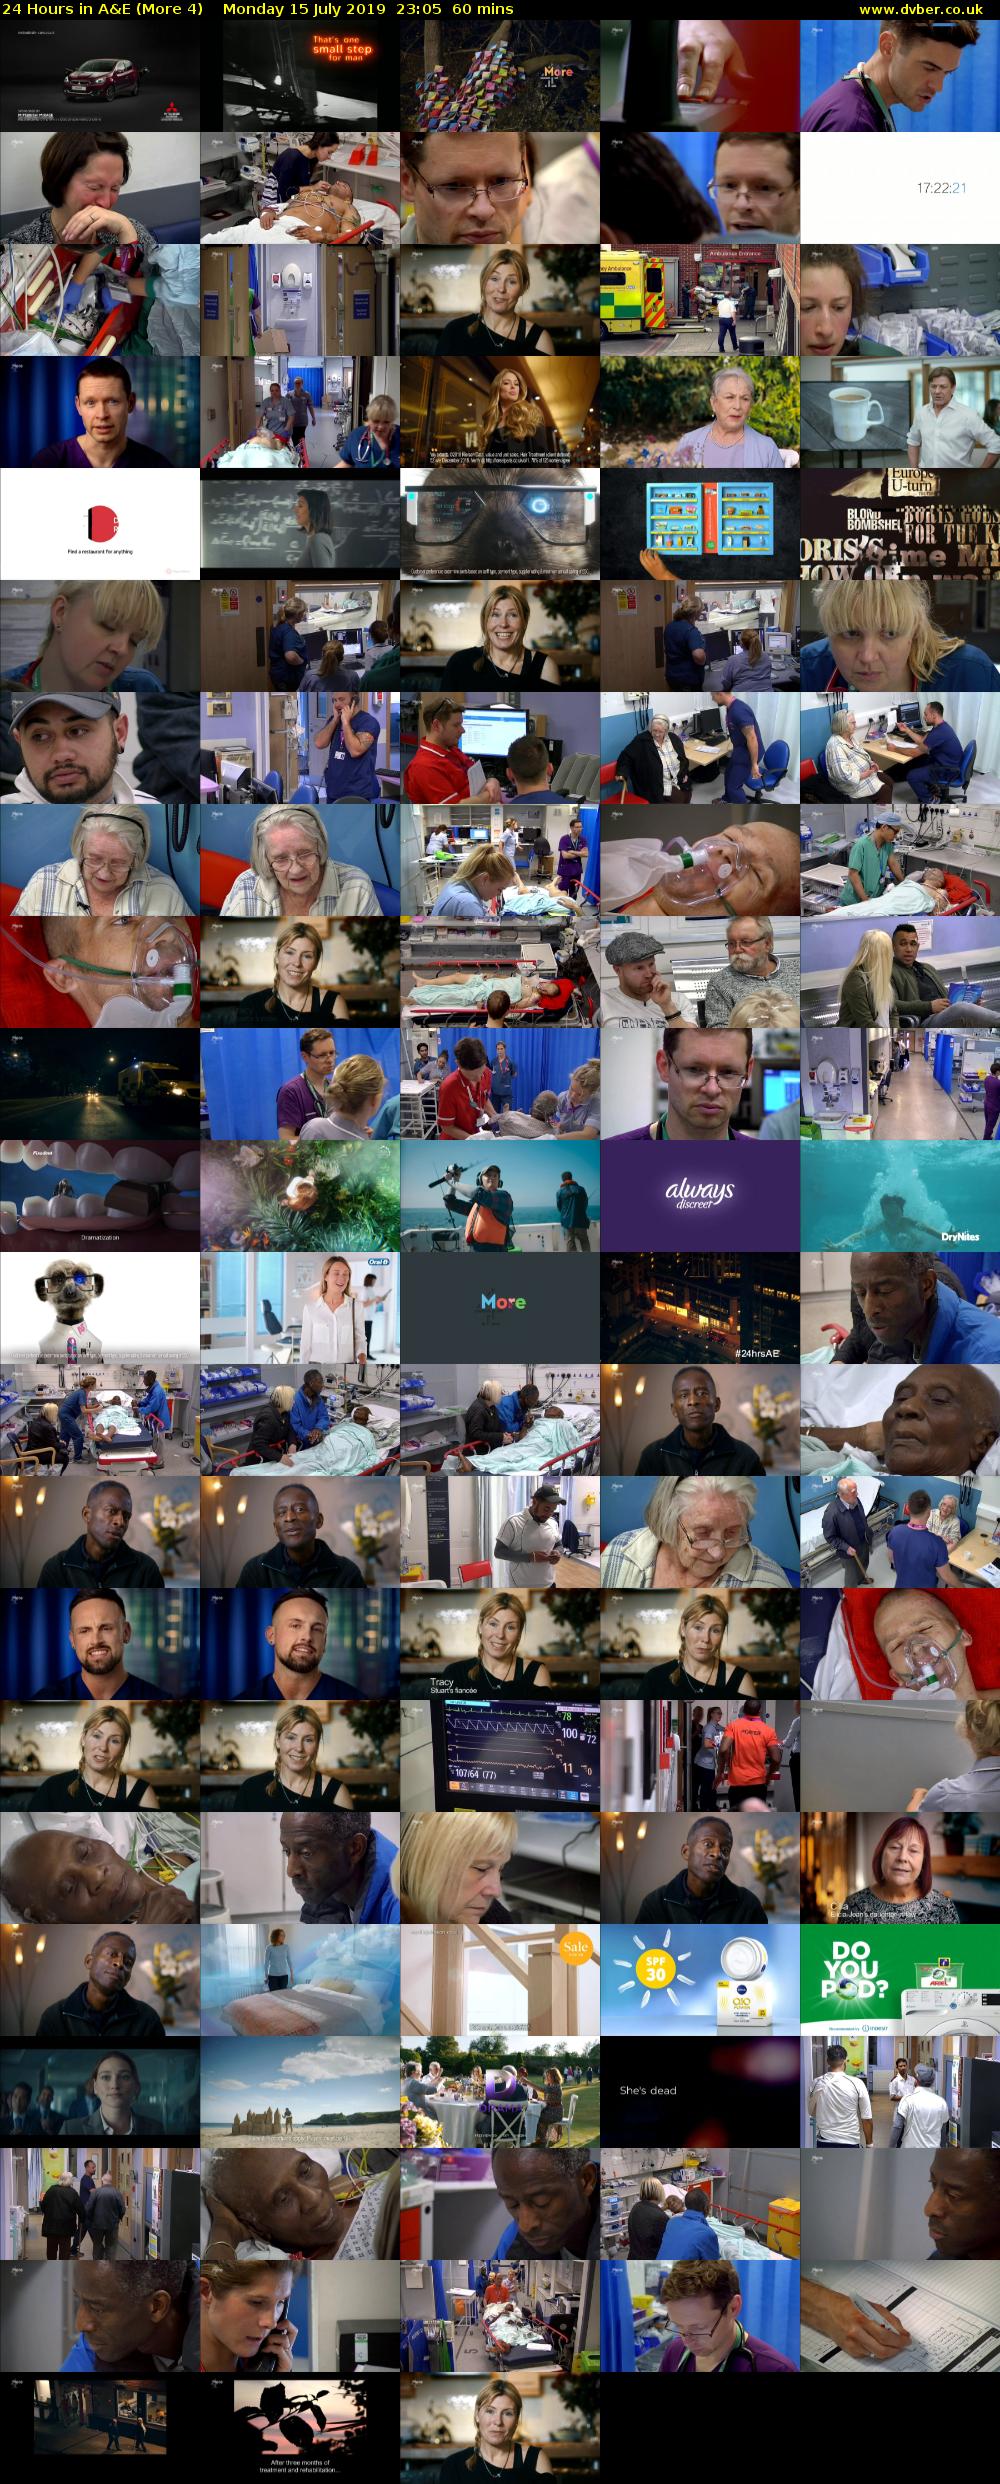 24 Hours in A&E (More 4) Monday 15 July 2019 23:05 - 00:05